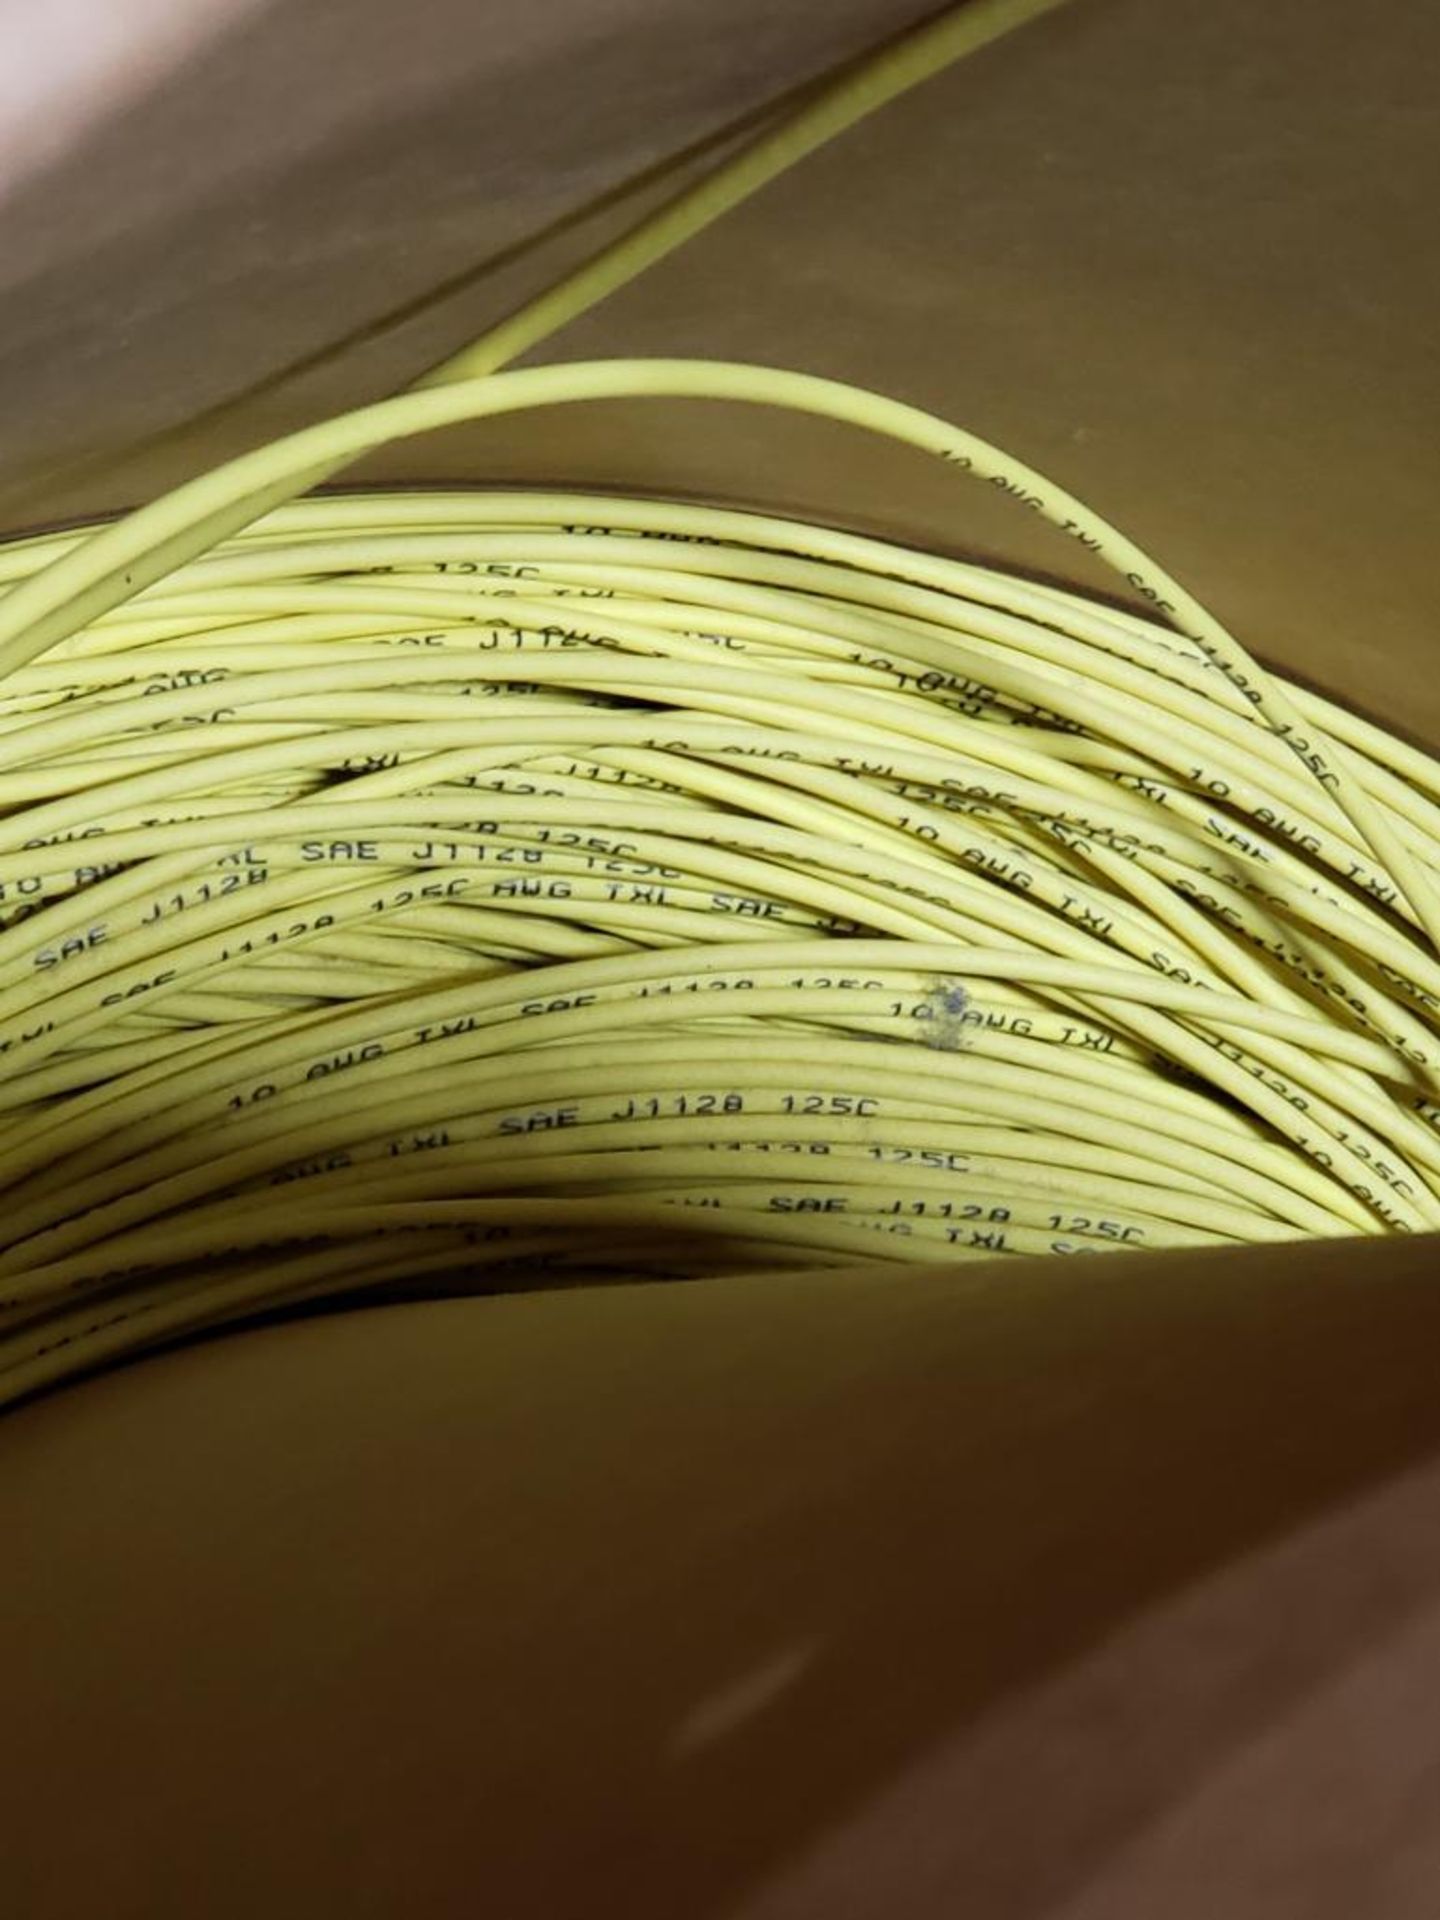 10 awg yellow print copper wire. Gross barrel weight, 193lbs. Partial barrel. - Image 2 of 6